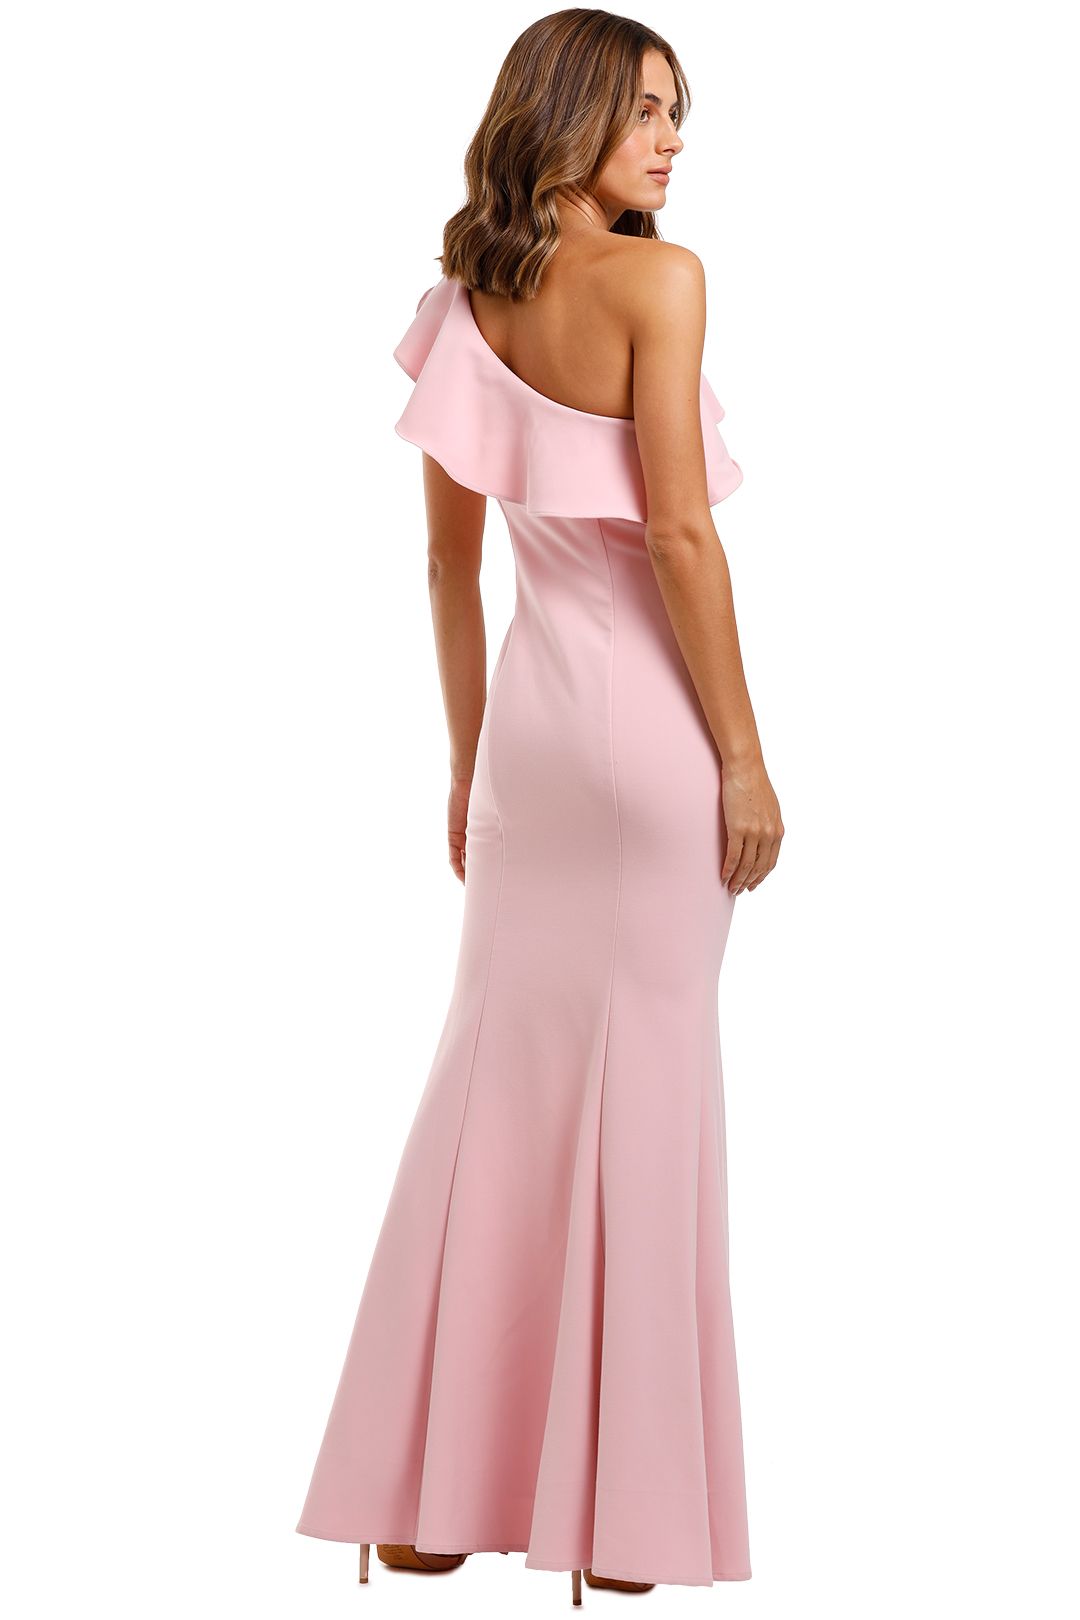 Likely NYC Kane Gown Ruffle